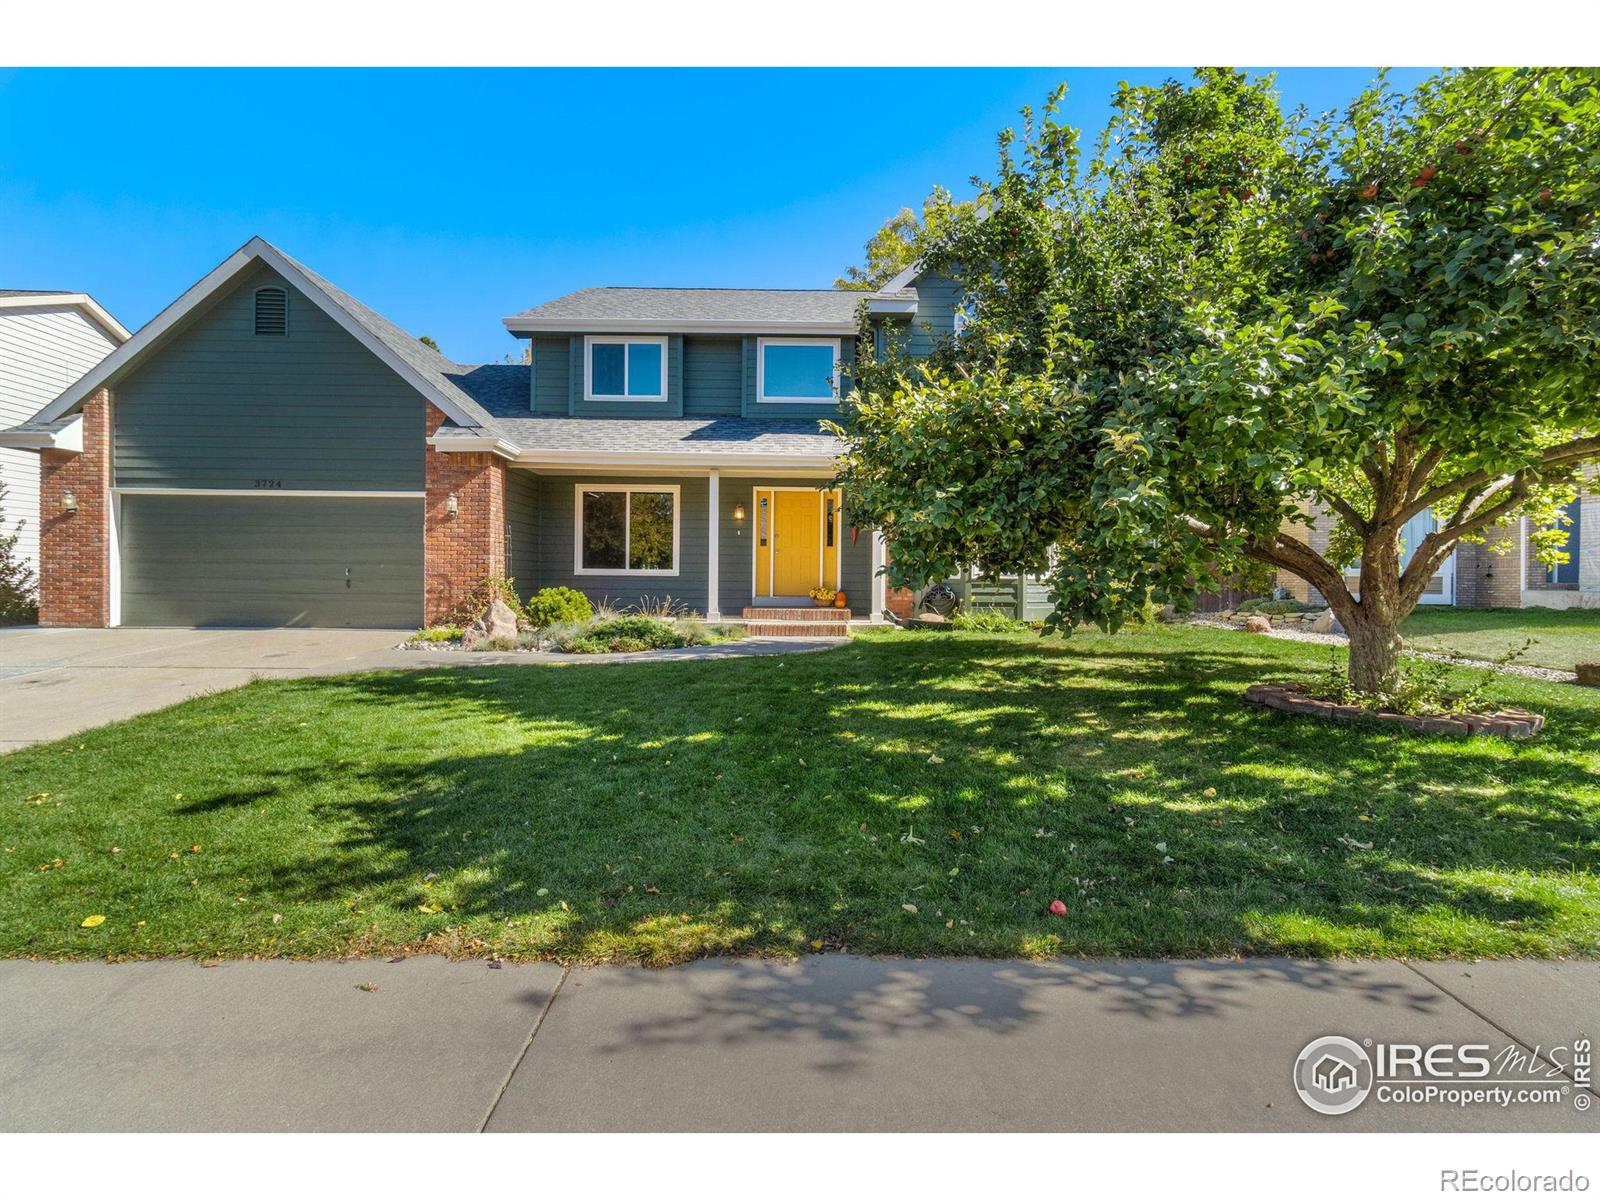 3724  ashmount drive, Fort Collins sold home. Closed on 2024-02-01 for $760,000.